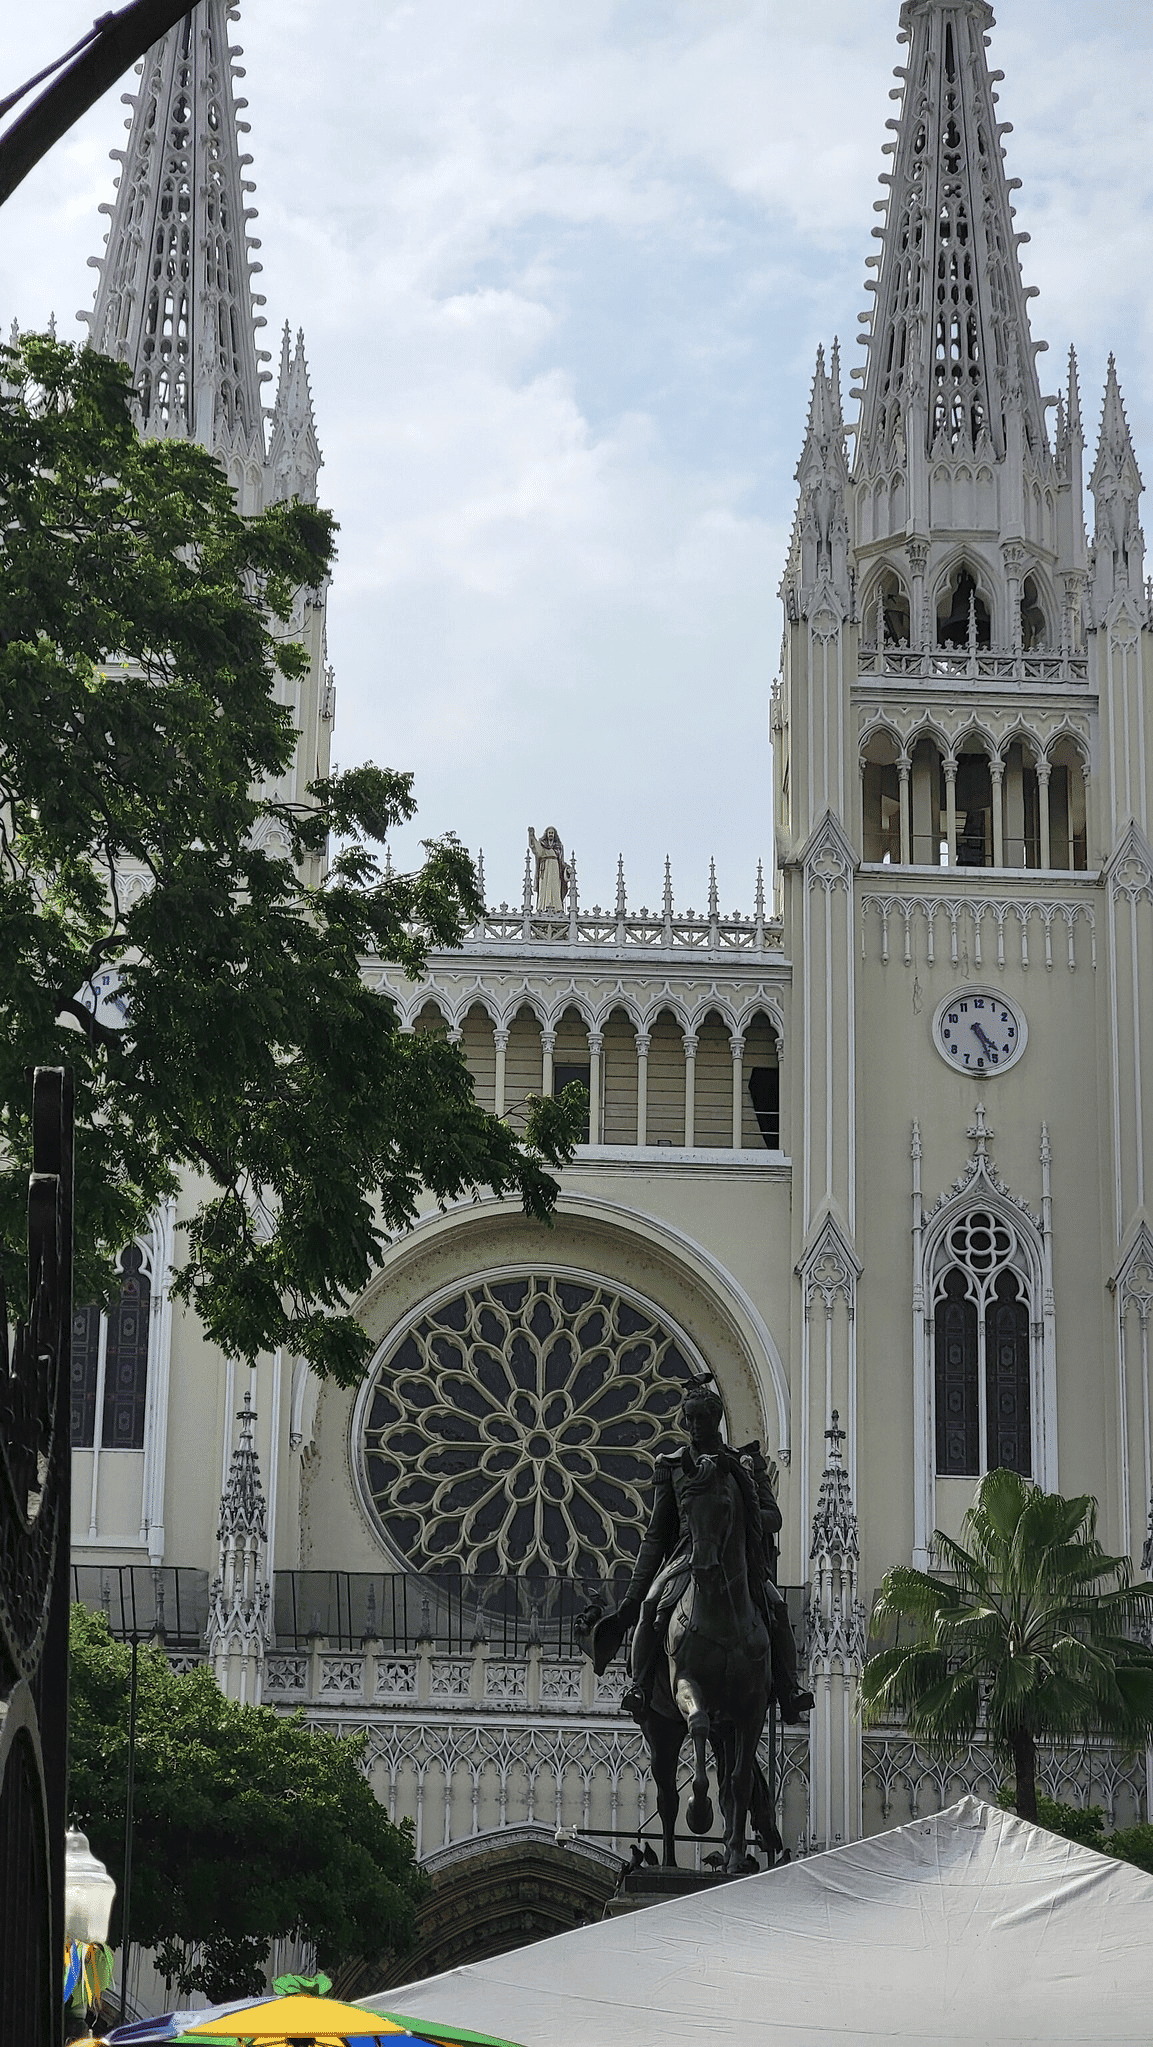 Neo-Gothic-style Metropolitan Cathedral of Guayaquil
It boasts several magnificent ceilings and one hundred twenty-six-stained-glass windows. 